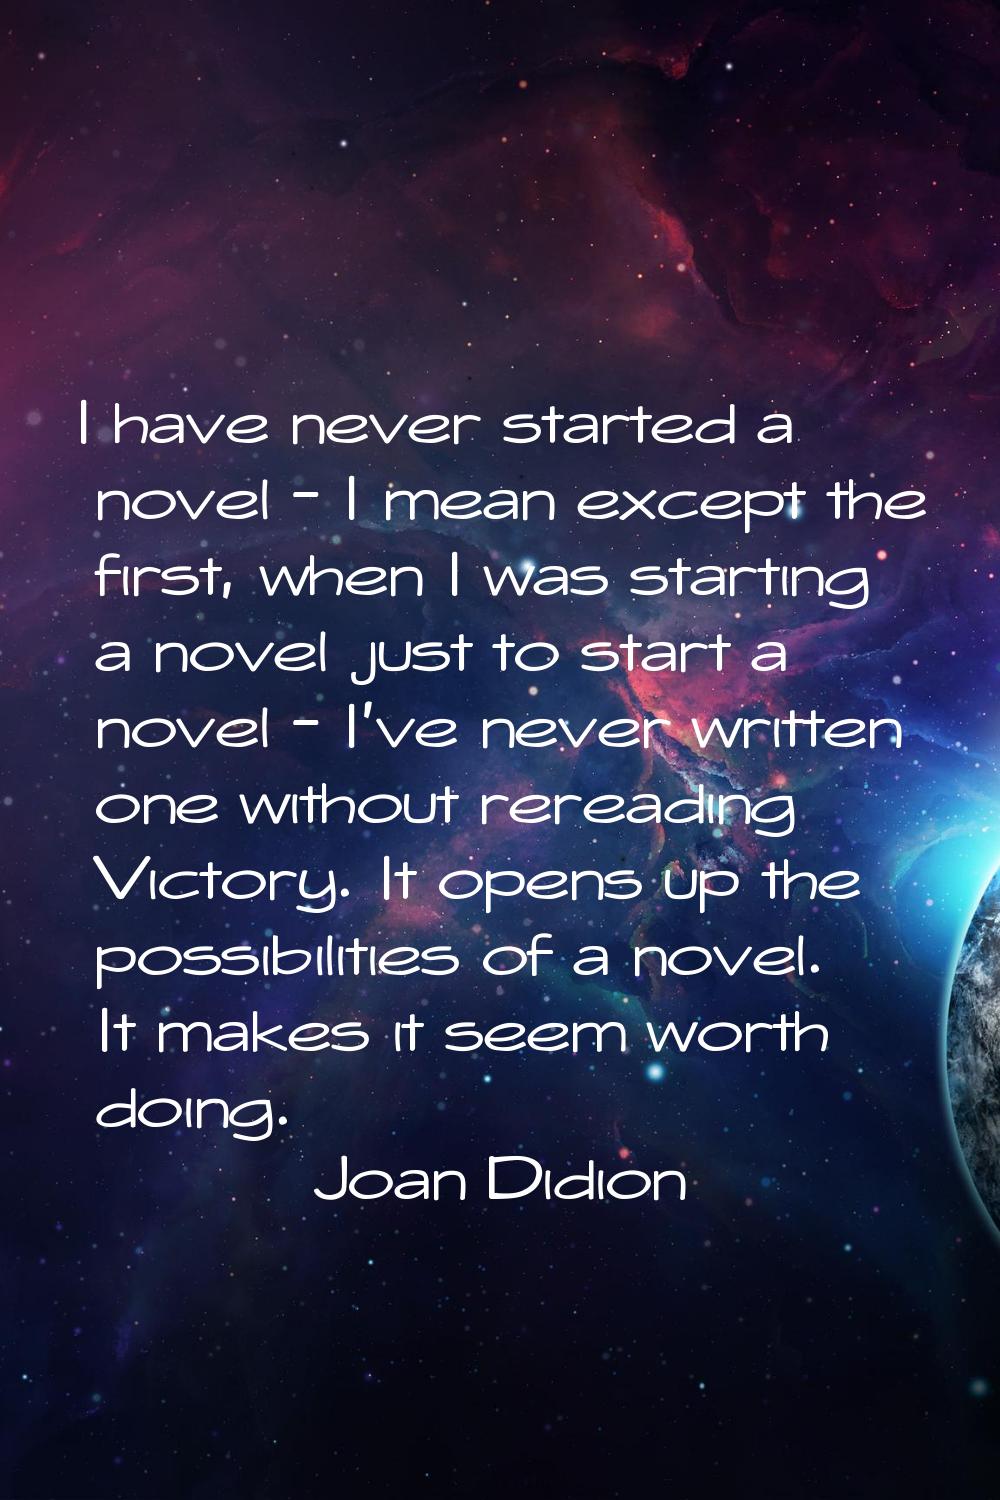 I have never started a novel - I mean except the first, when I was starting a novel just to start a